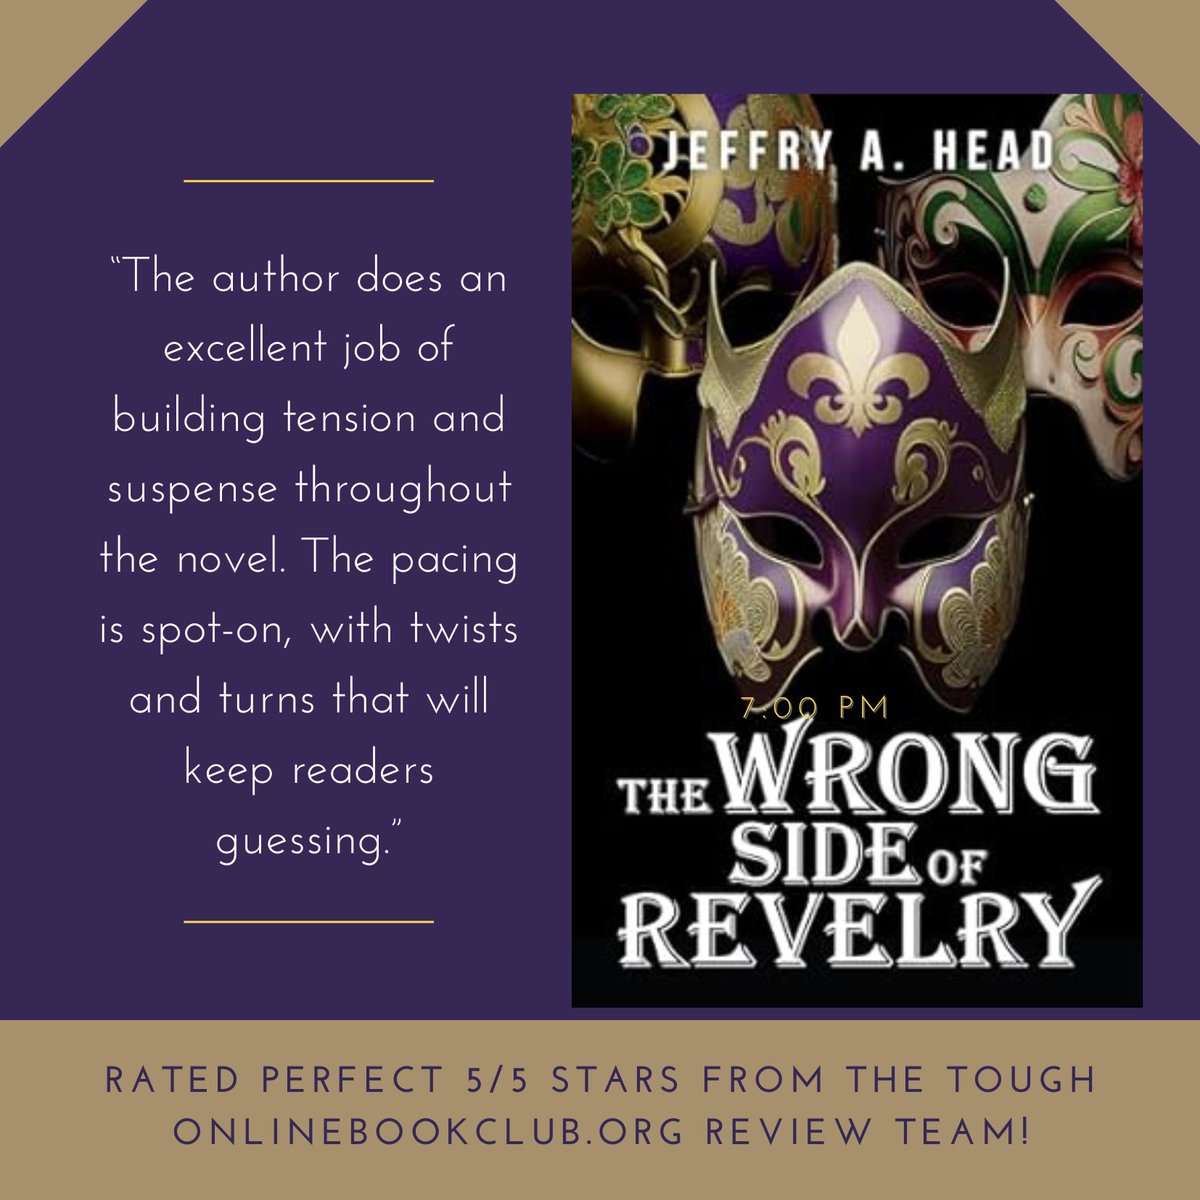 Hello, friends! Please join me in giving a huge congratulations to author Jeffry A. Head whose book 'The Wrong Side of Revelry' just earned a perfect 5/5 rating from the tough official OnlineBookClub Review Team 😃 Follow the author: @HeadJeffry82597 Published by @therealsager…